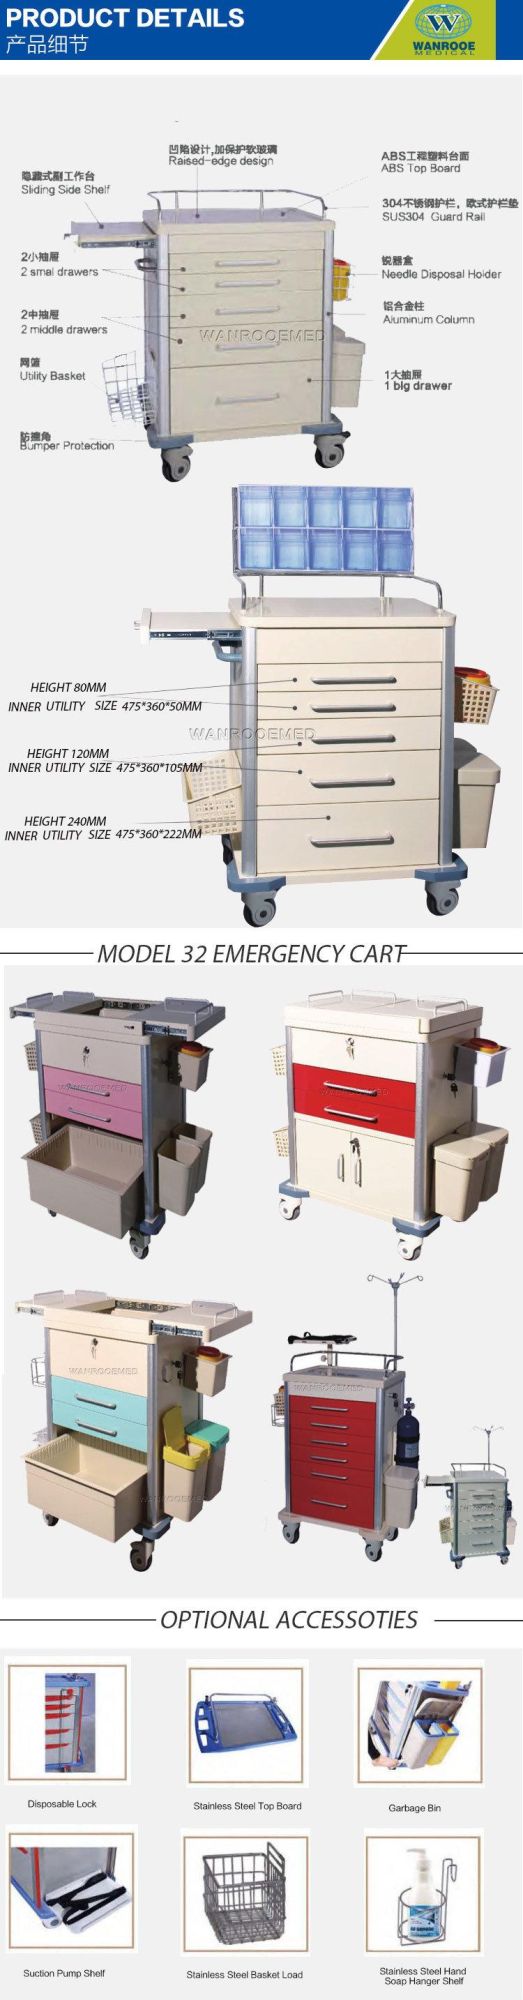 32 Series ABS Emergency Clinical Patient Drug Distribute Hospital Mobile Treatment Medicine Cart